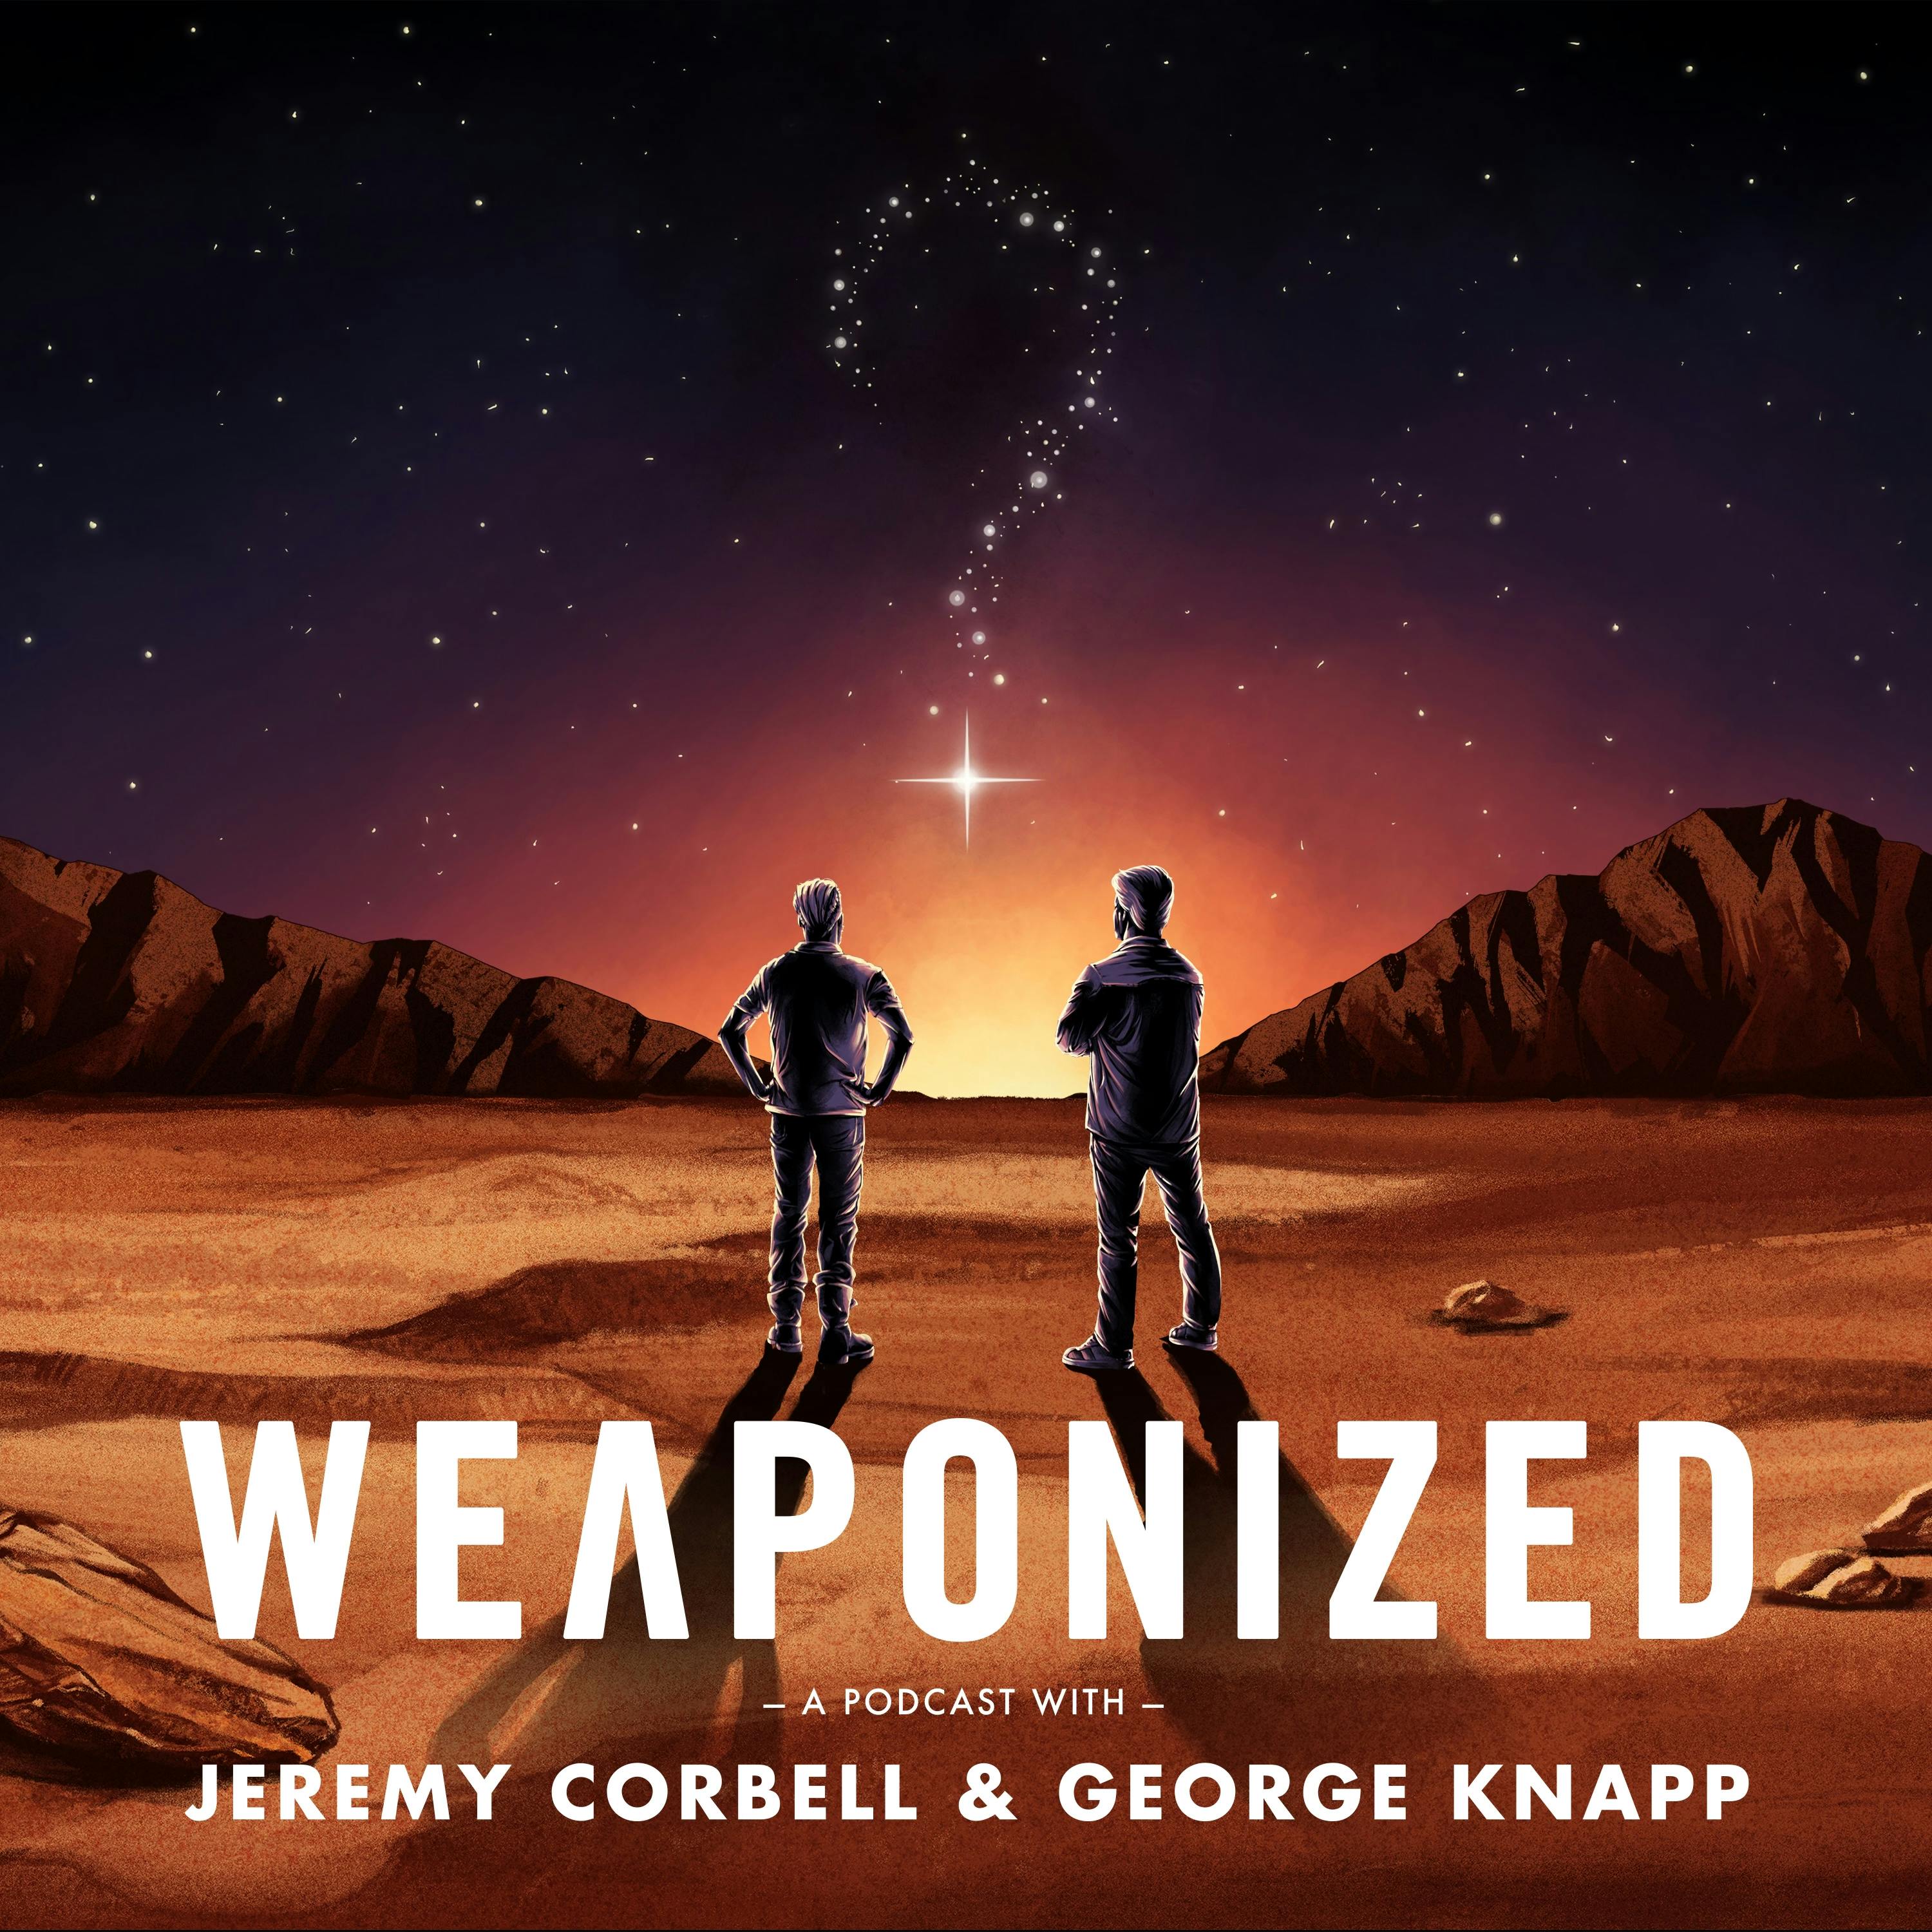 WEAPONIZED with Jeremy Corbell & George Knapp podcast show image